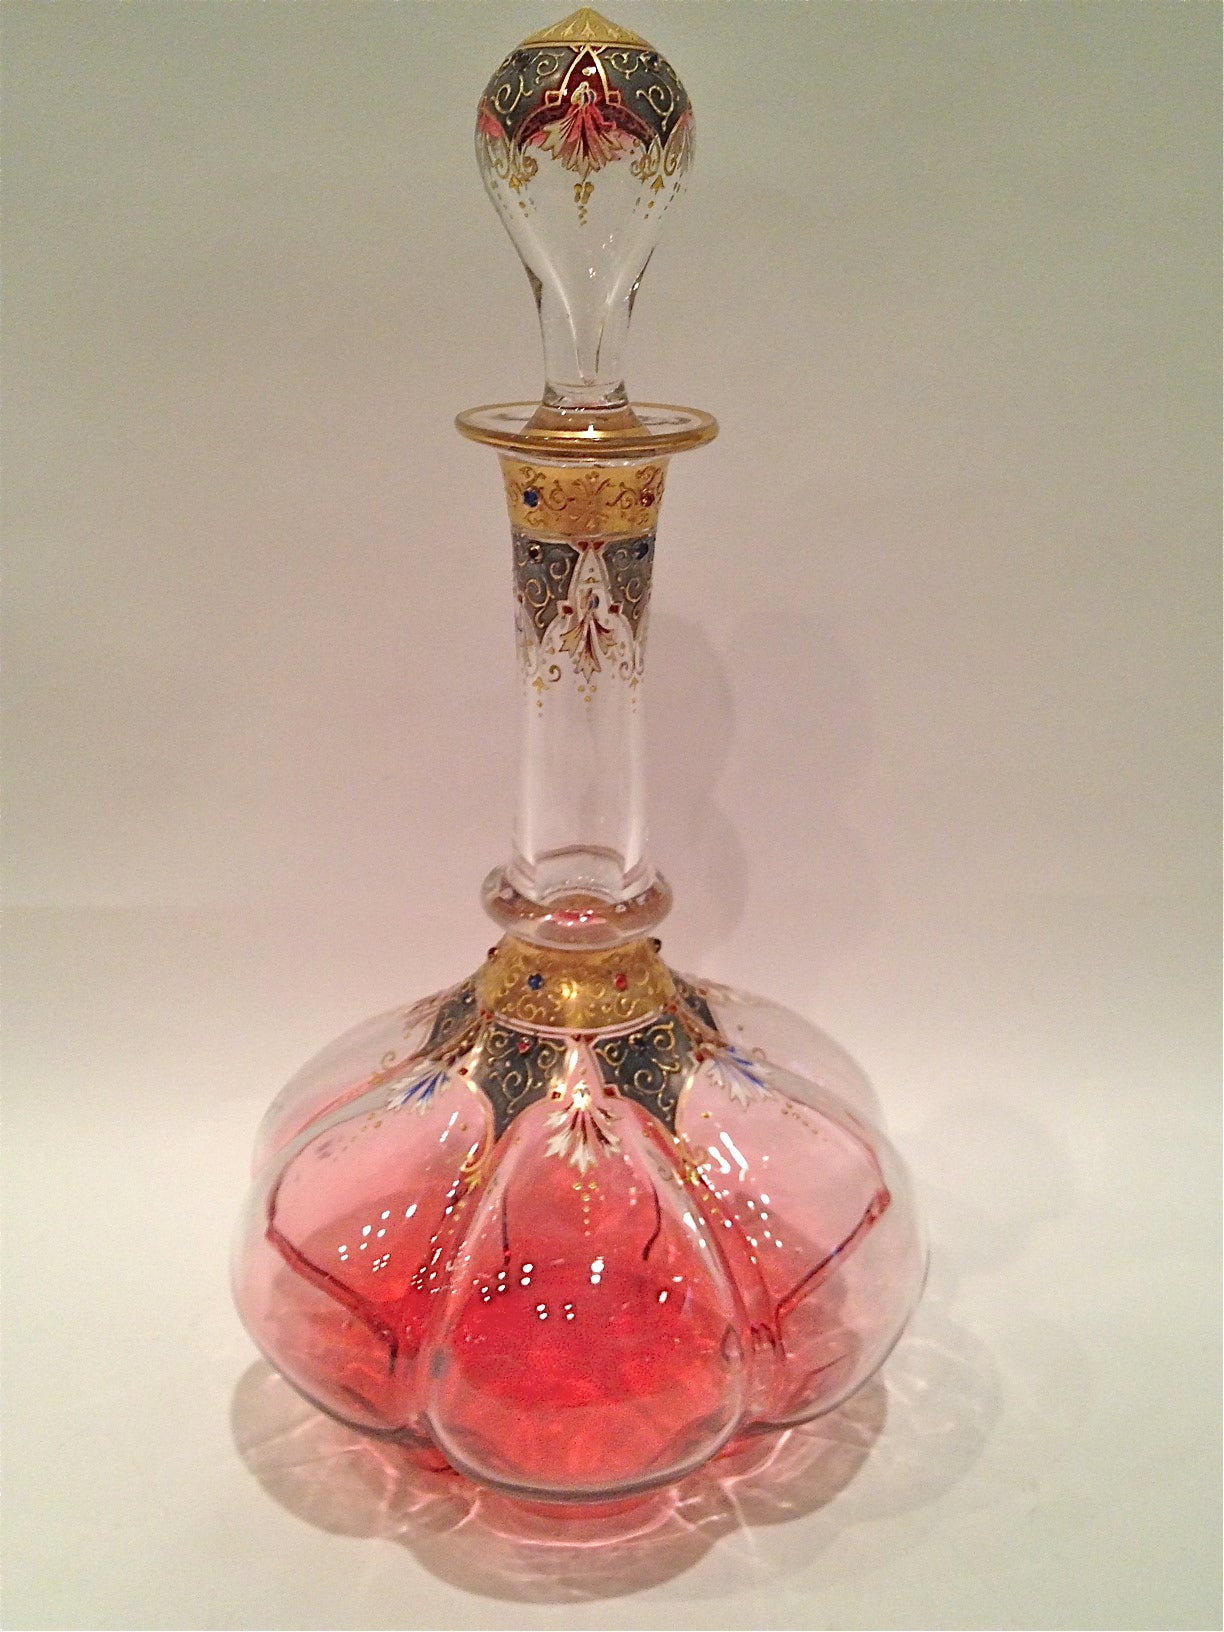 Jeweled and Gilded Two Color Moser Decanter c. 1900